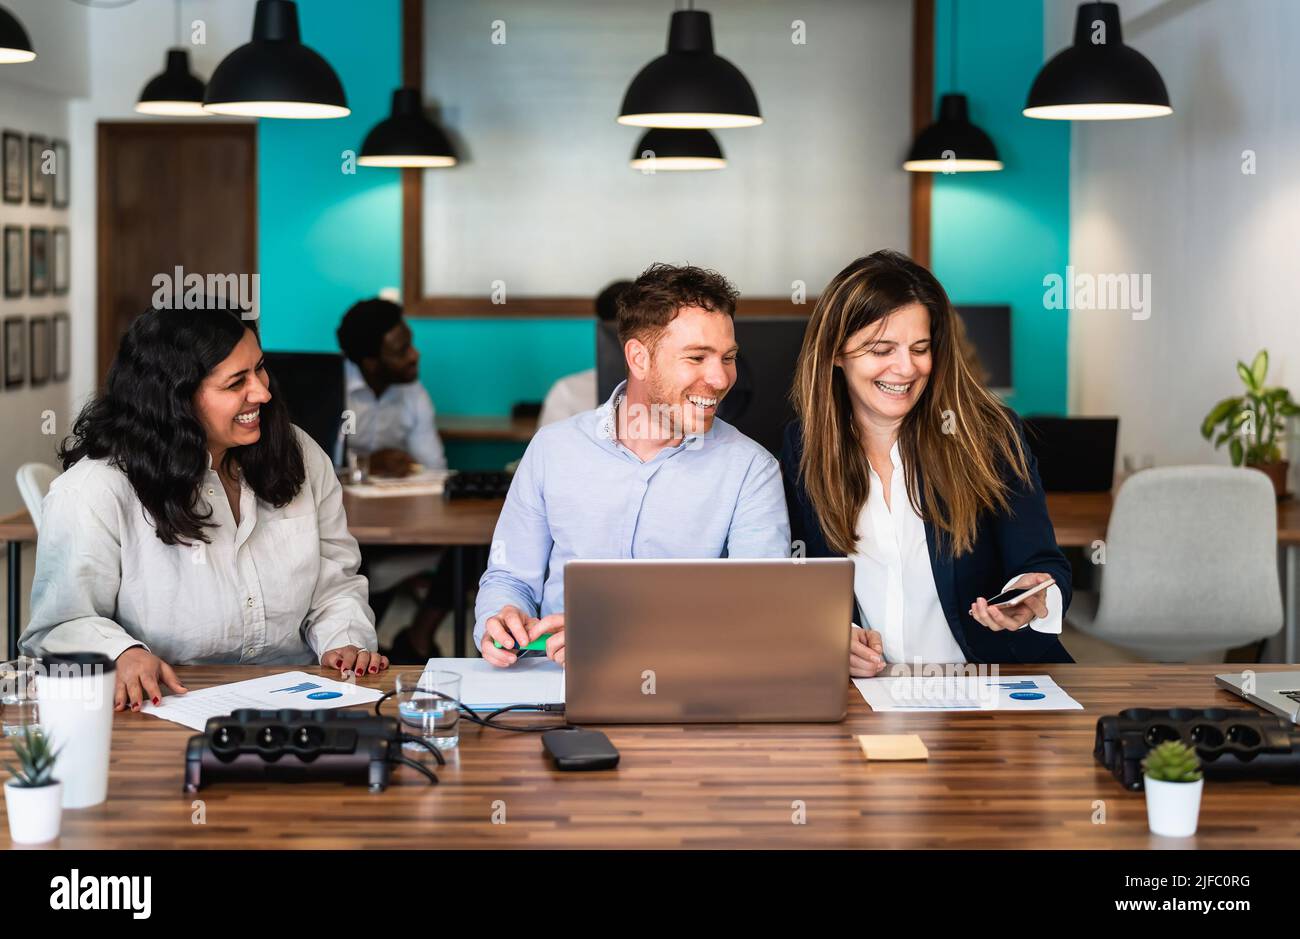 Business team in co-working creative space Stock Photo